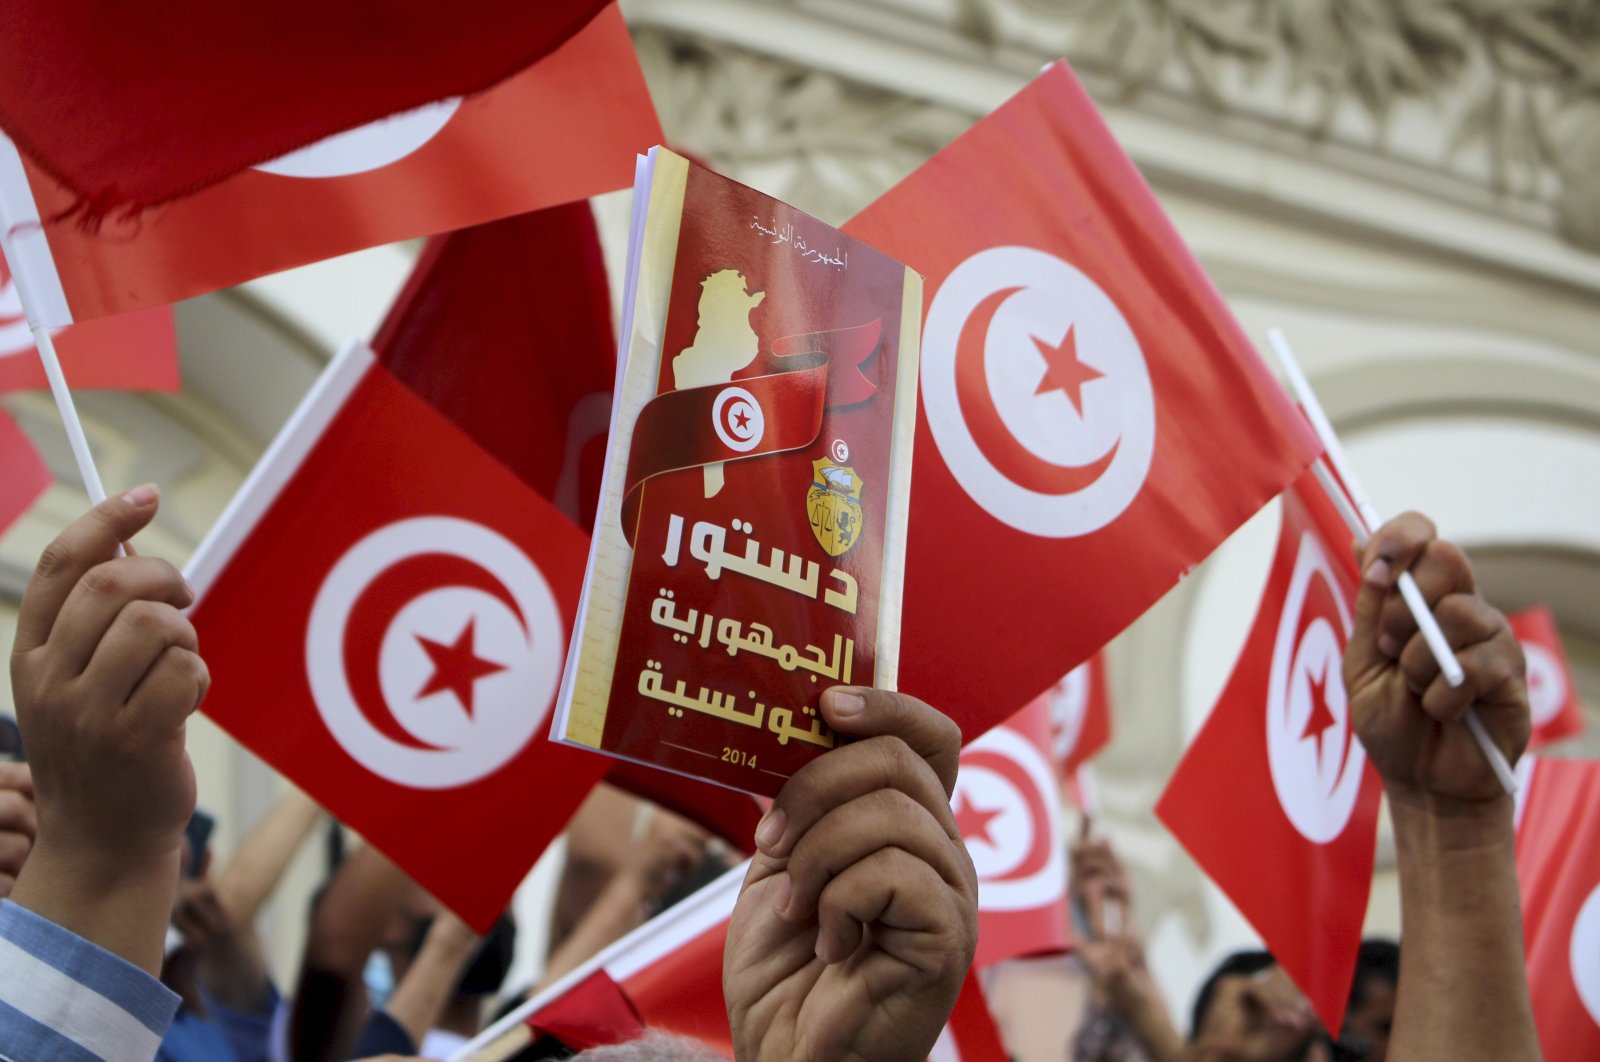 A demonstrator holds a copy of the Tunisian constitution, during a protest against Tunisian President Kais Saied in Tunis, Tunisia, Sunday, Sept. 26, 2021. (AP File Photo)